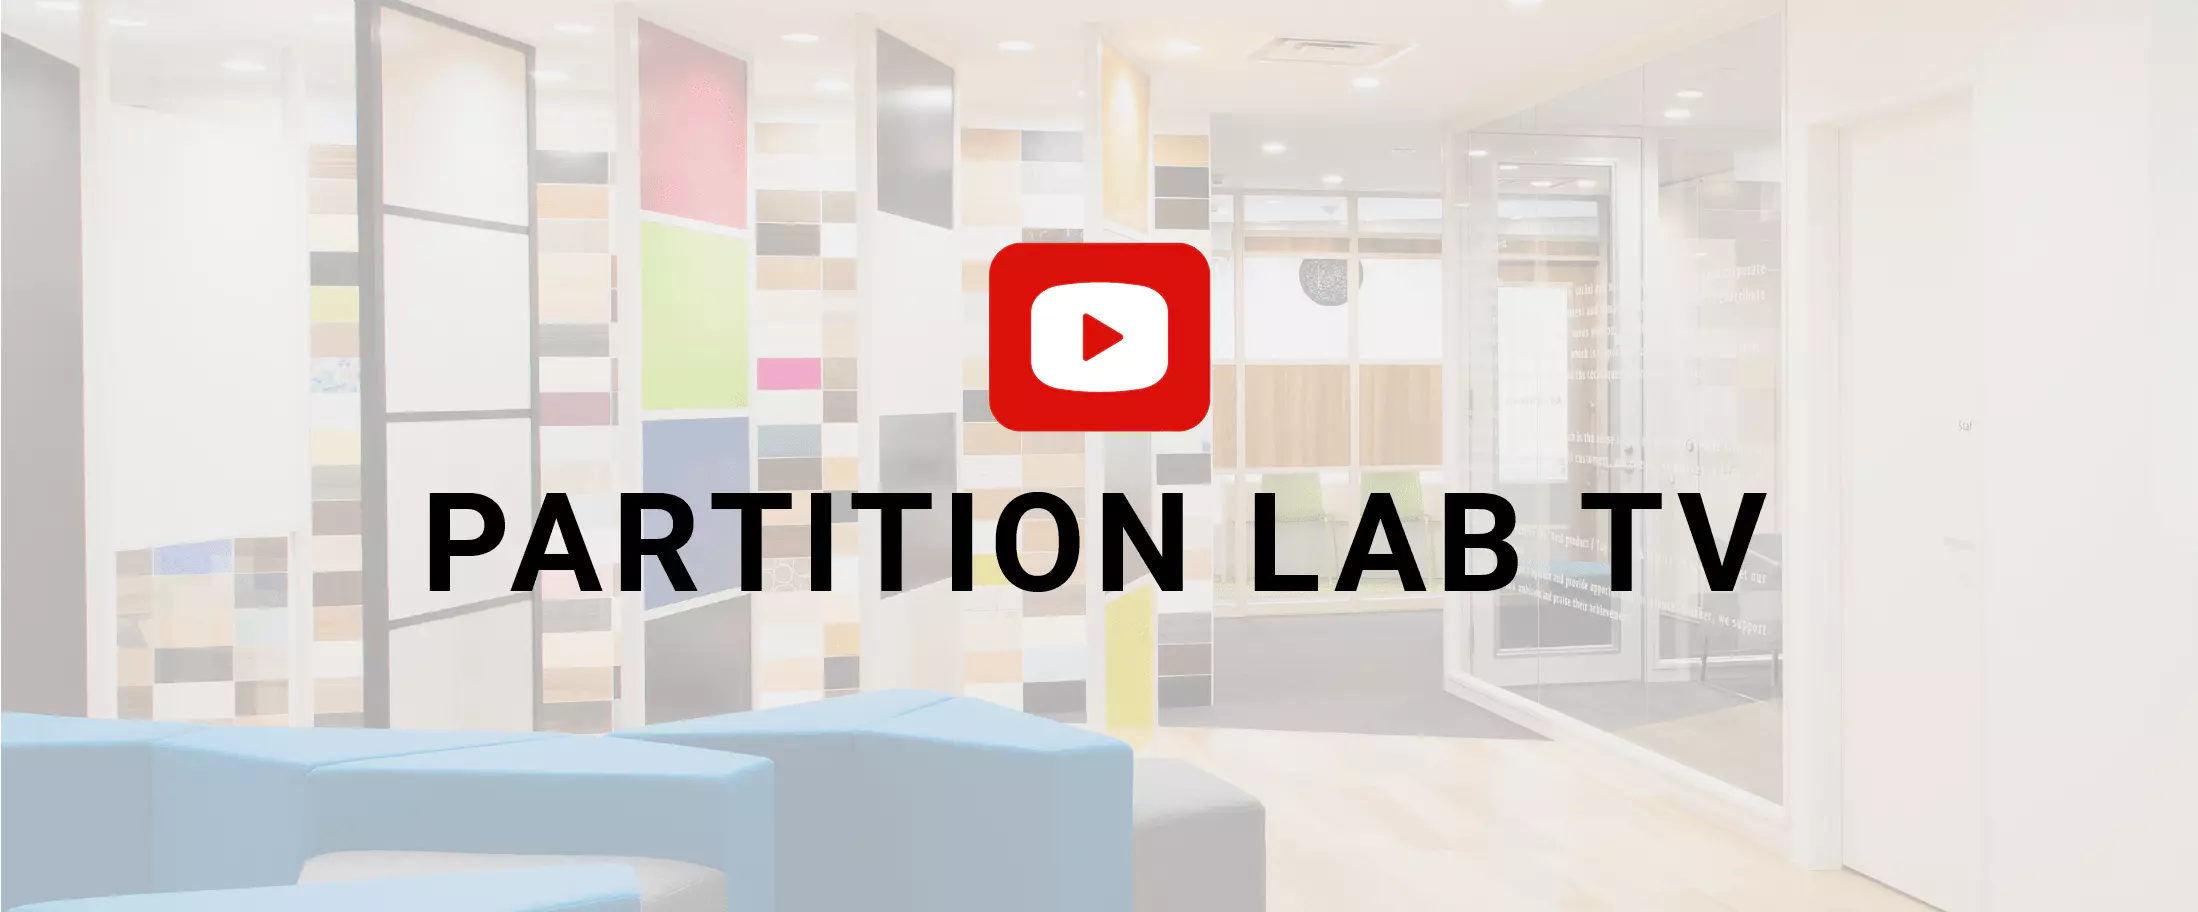 youtube | PARTITION LAB TV